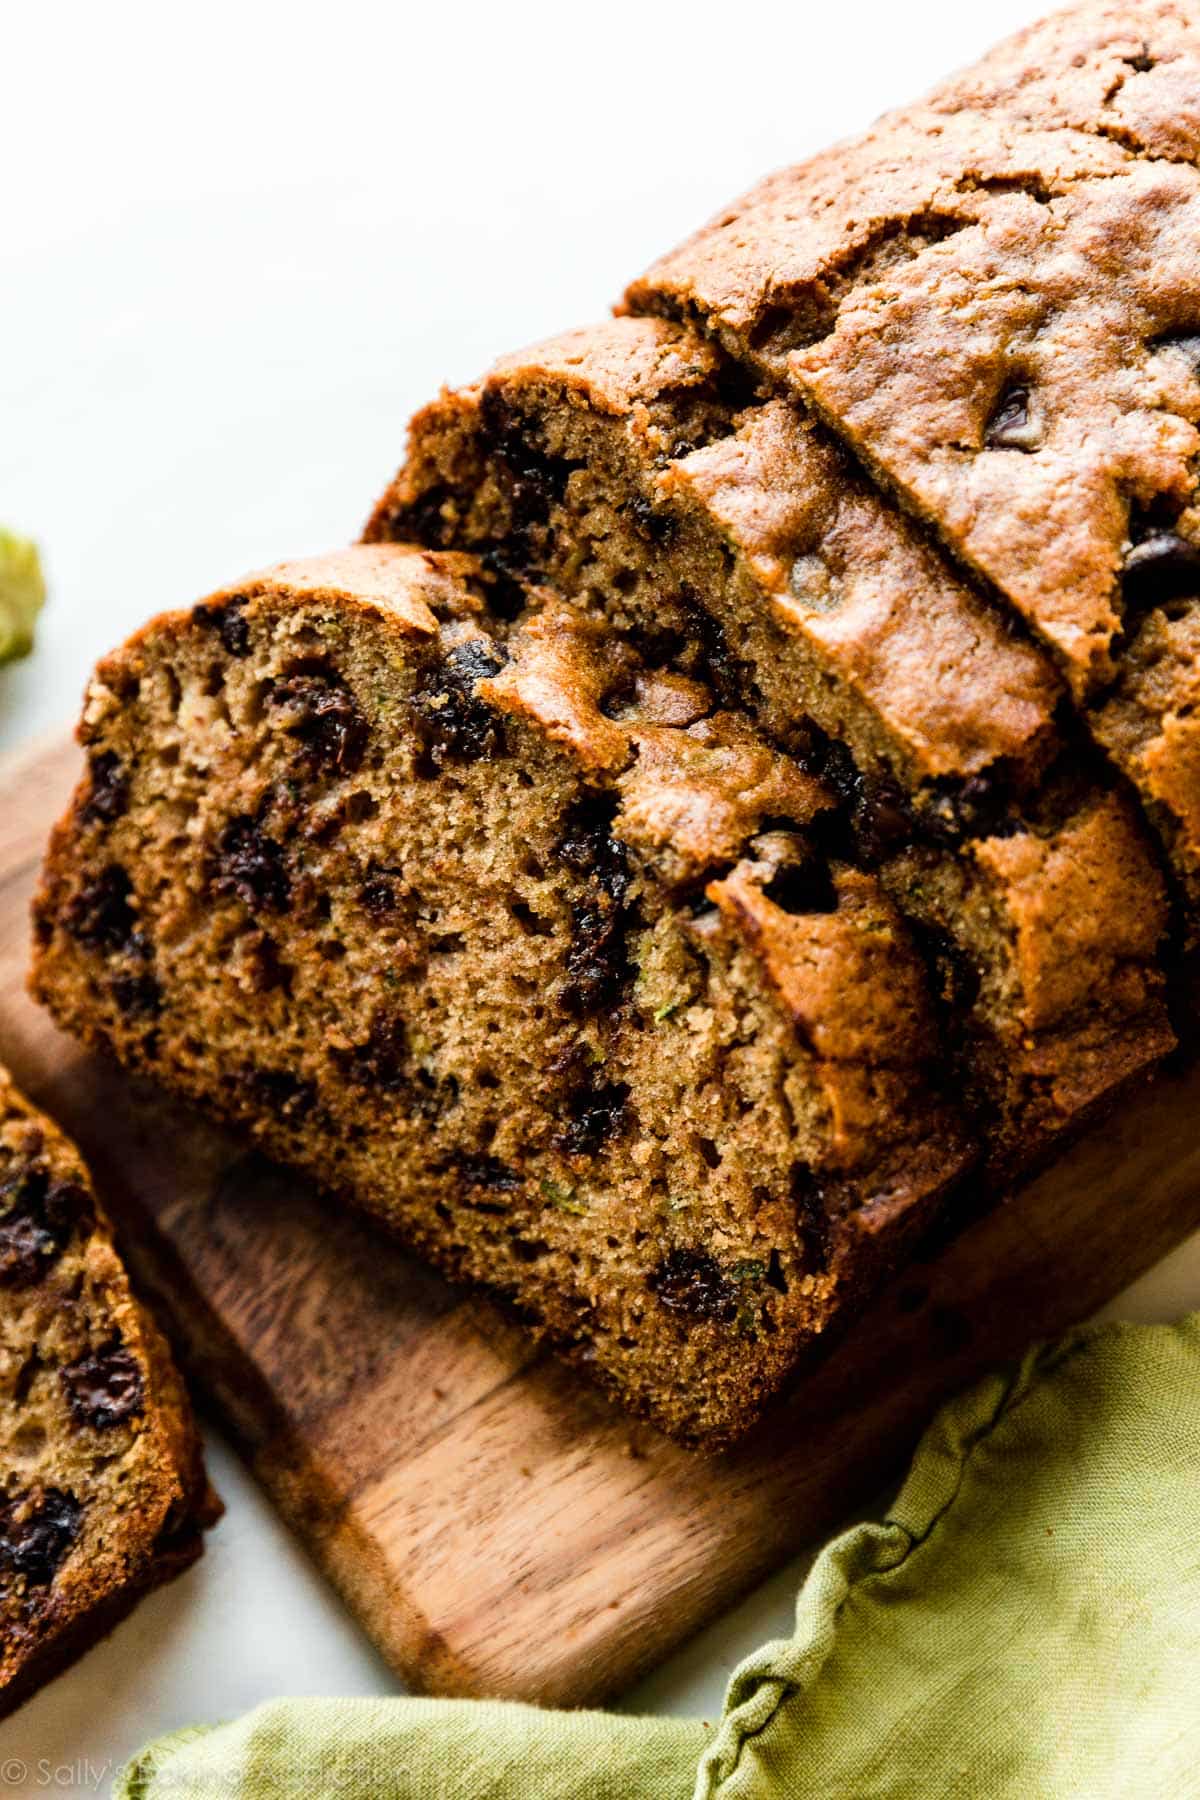 Zucchini bread slices with chocolate chips